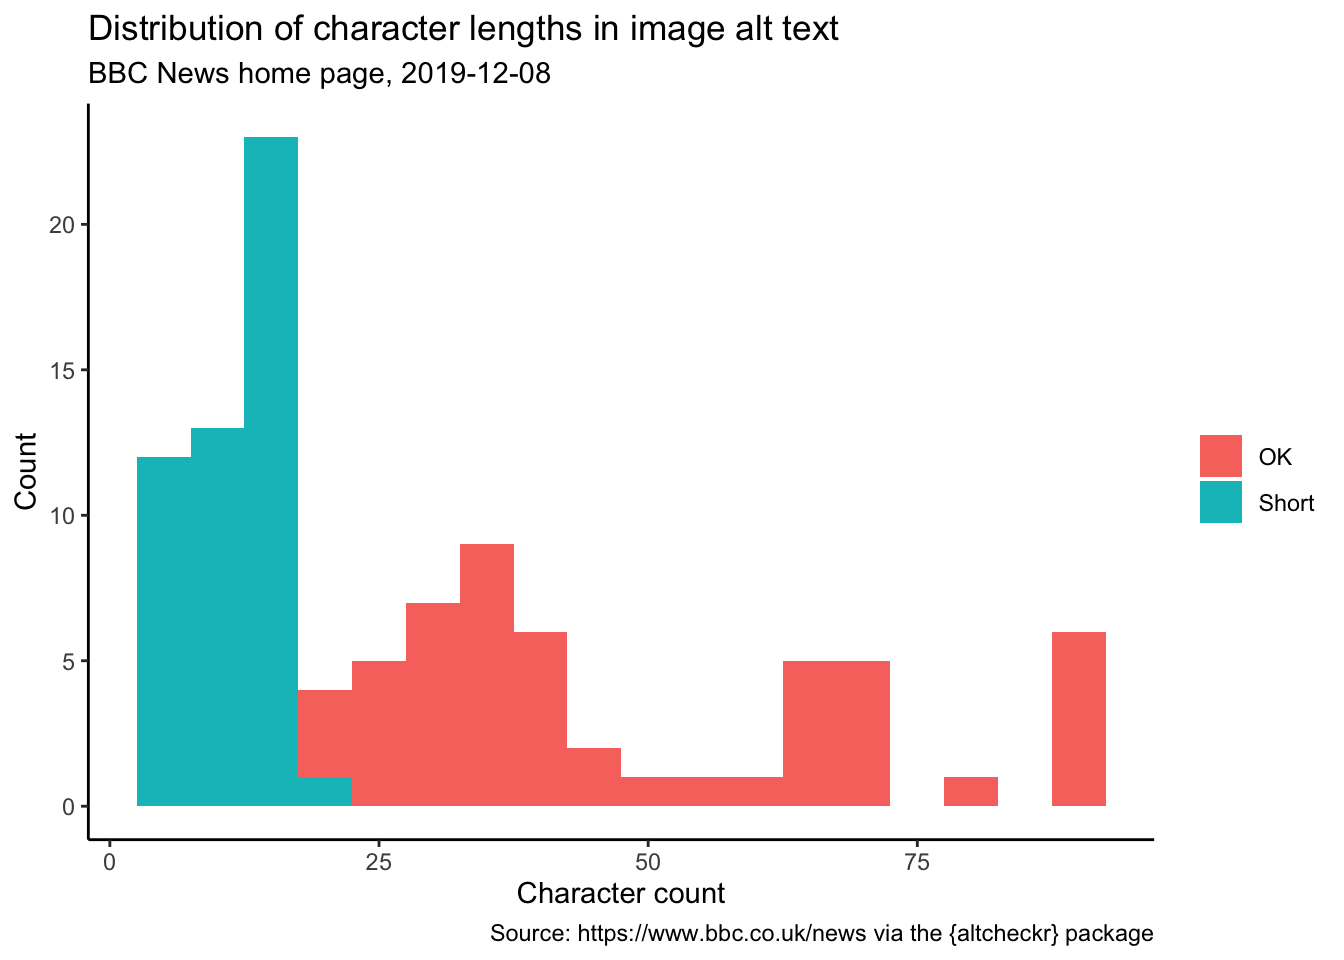 Histogram of alt text length in characters, spread from 0 to 100 on the x-axis. Most common if about 20.